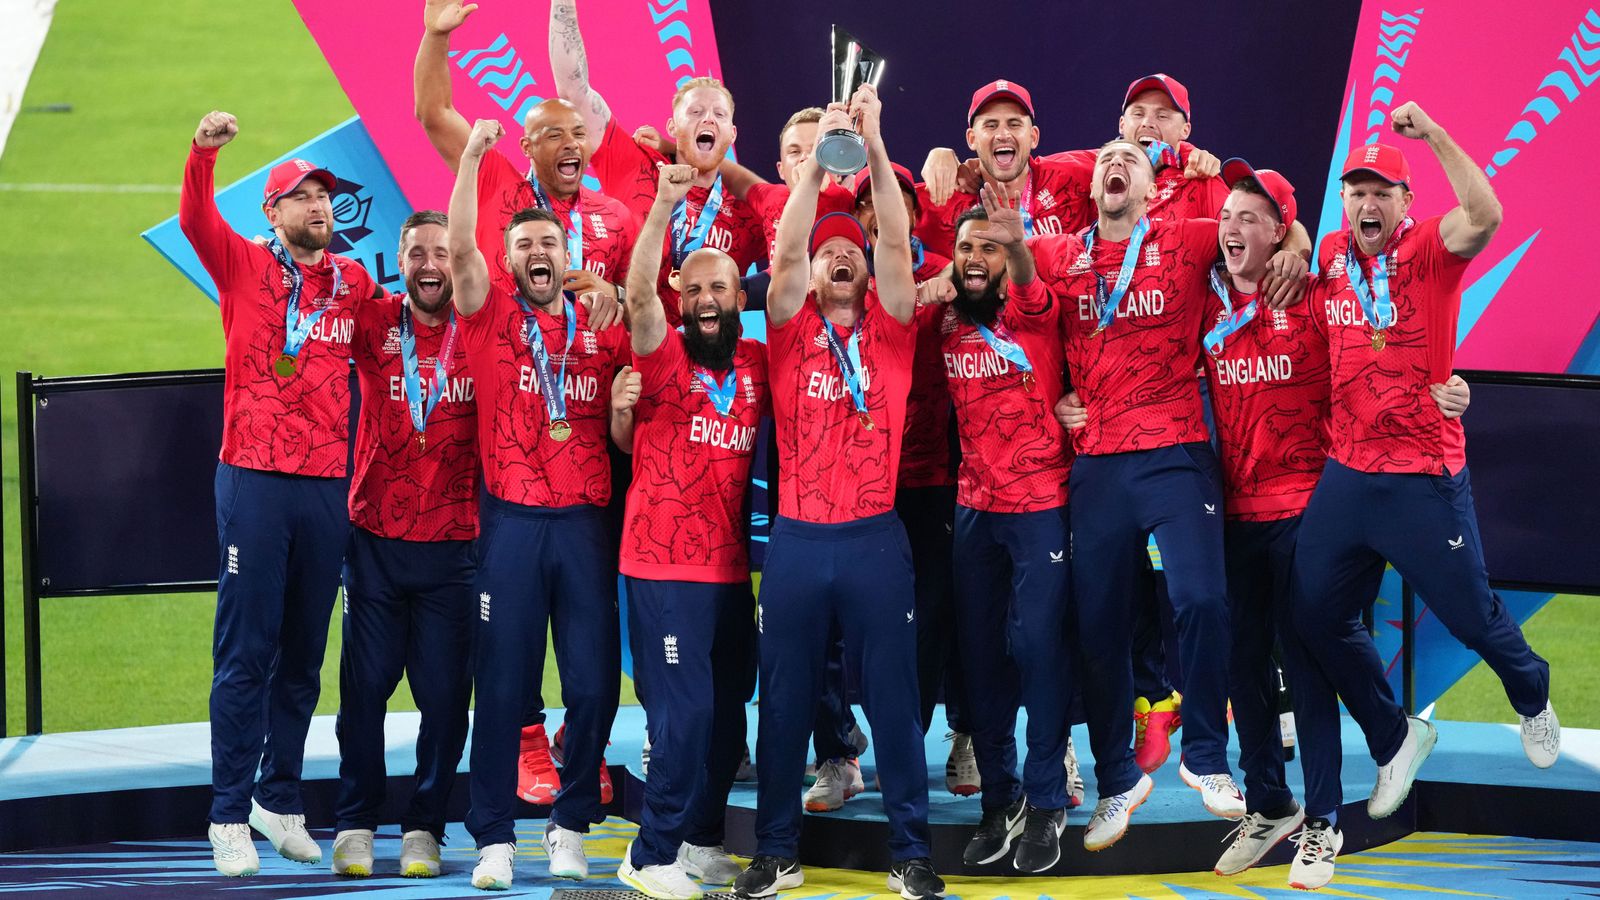 England beat Pakistan to win the the T20 World Cup trophy in Melbourne in 2022